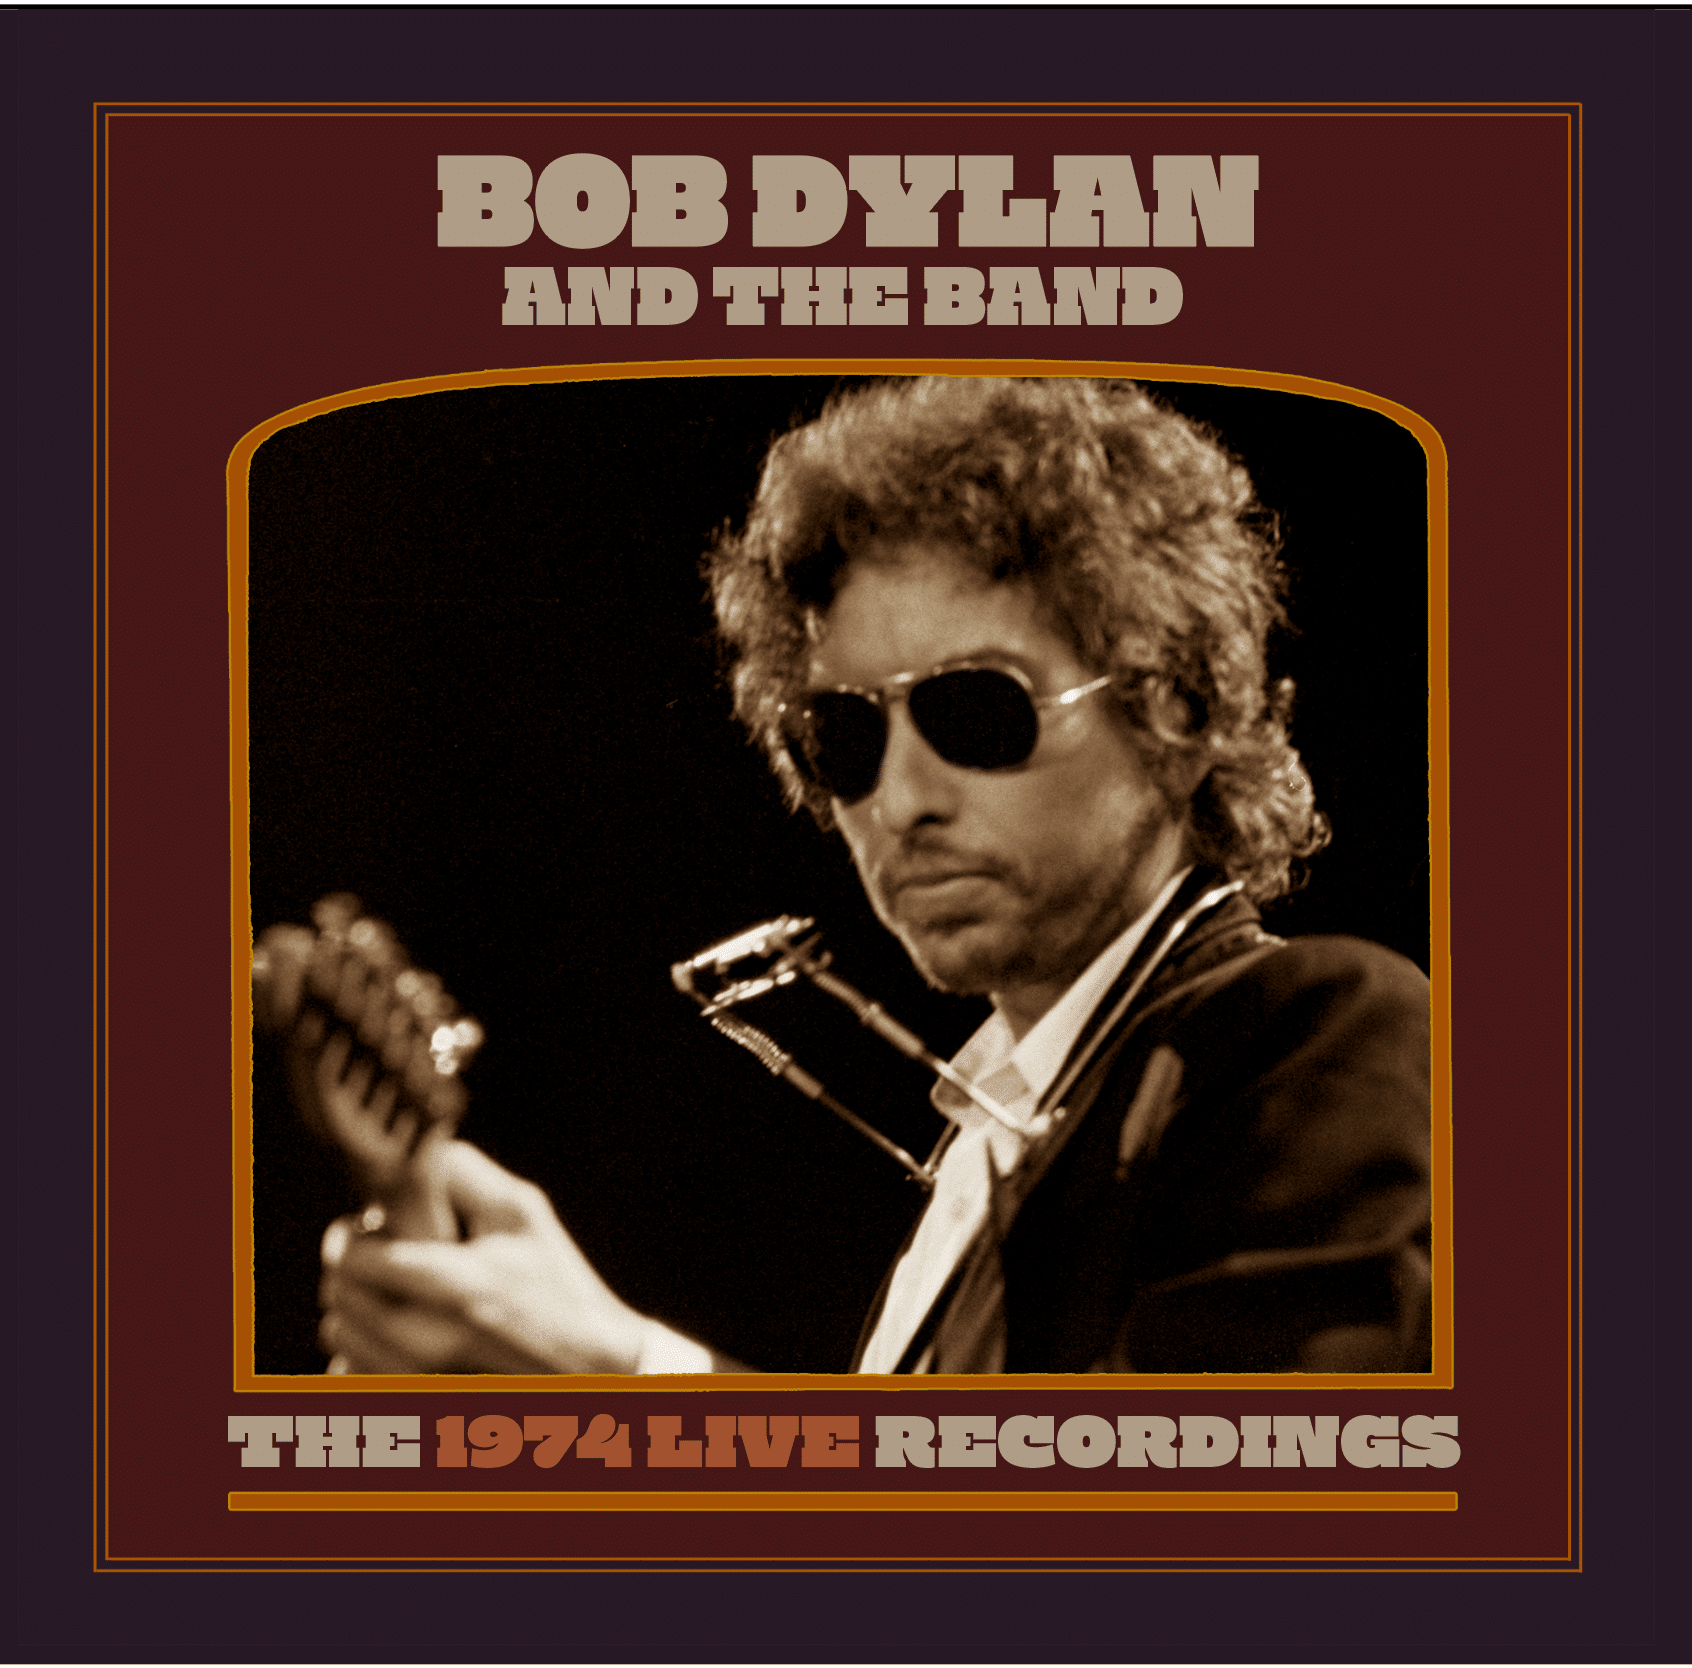 Bob Dylan & The Band - The 1974 Live Recordings